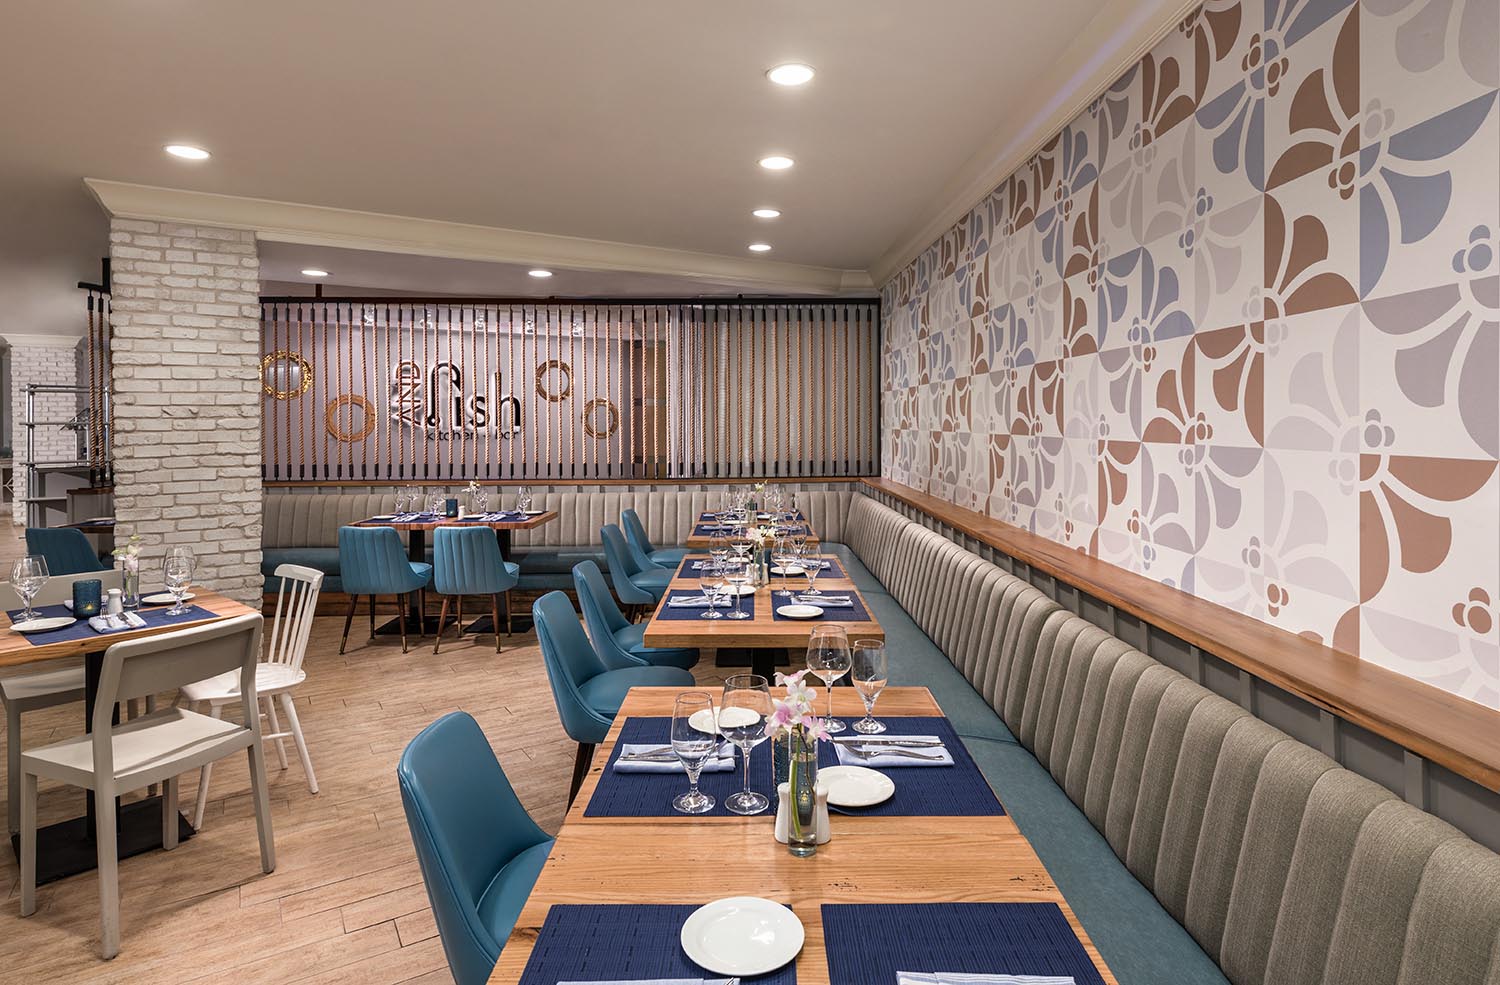 Seafood Restaurant Decoration Wallpapers